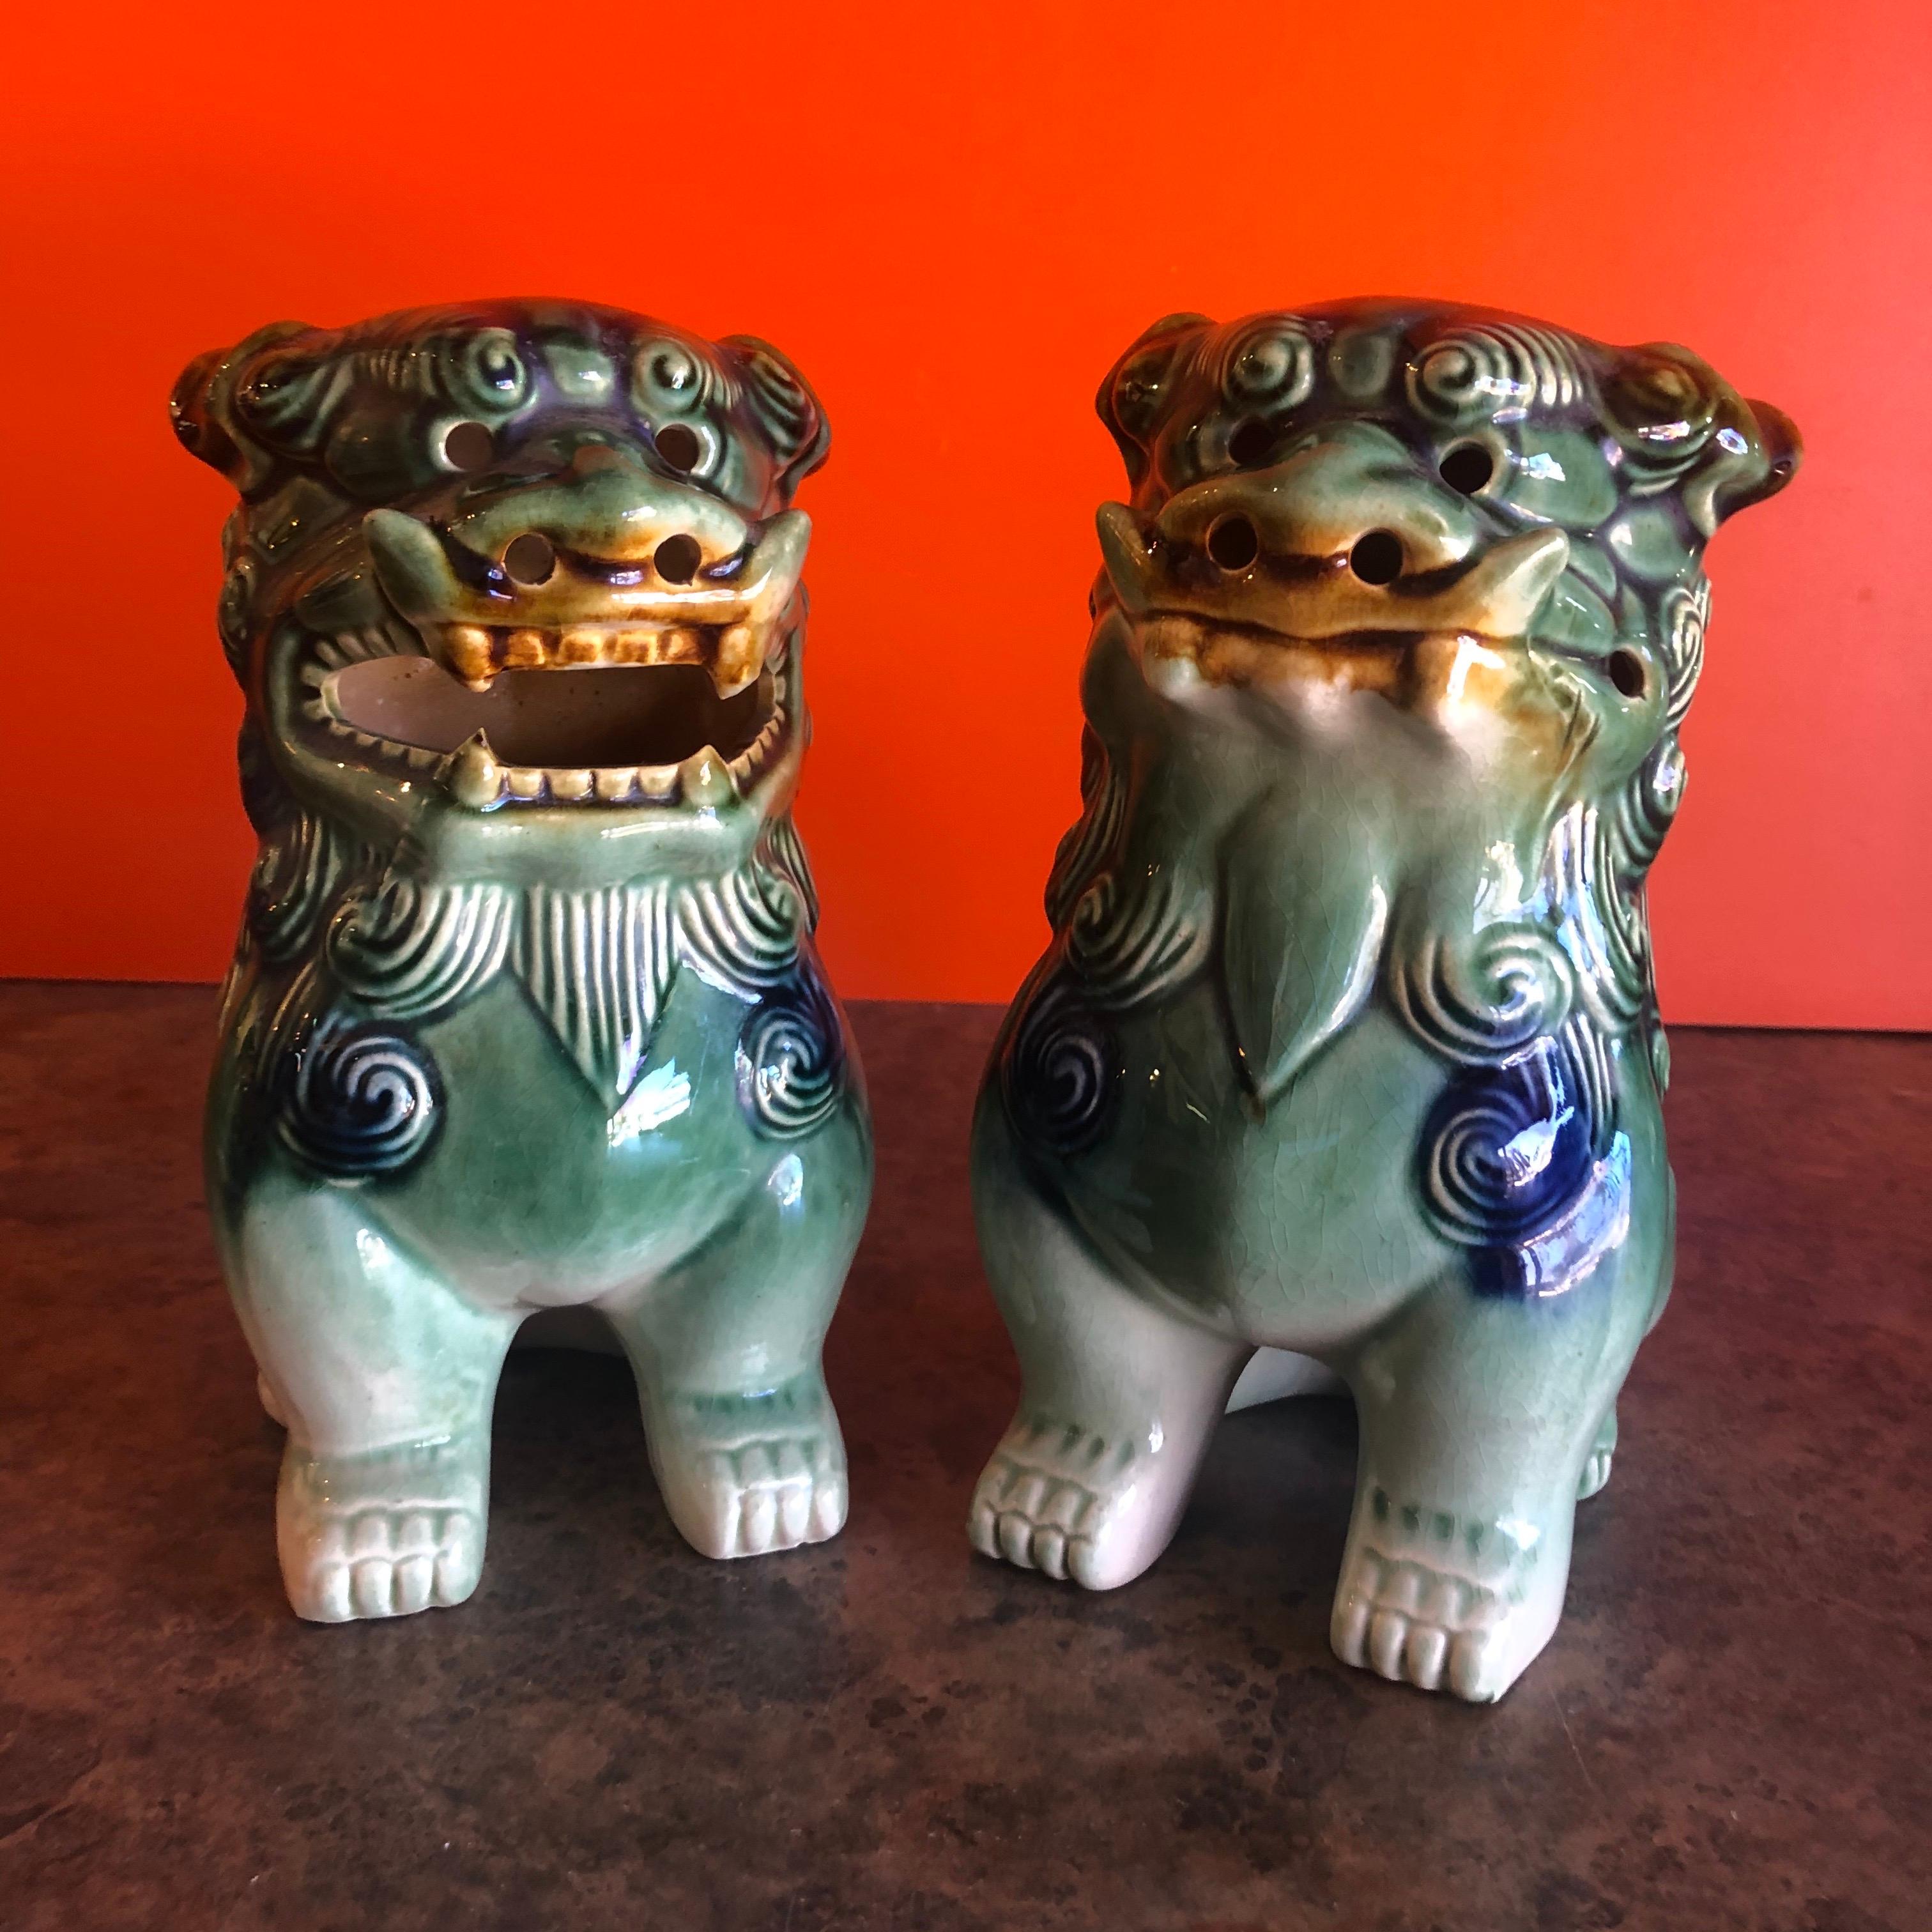 A very nice pair of vintage green, white and blue ceramic foo dogs, circa 1970s. Excellent condition and patina; makes a great pair of book ends or a fun decor item in any room! #1080.